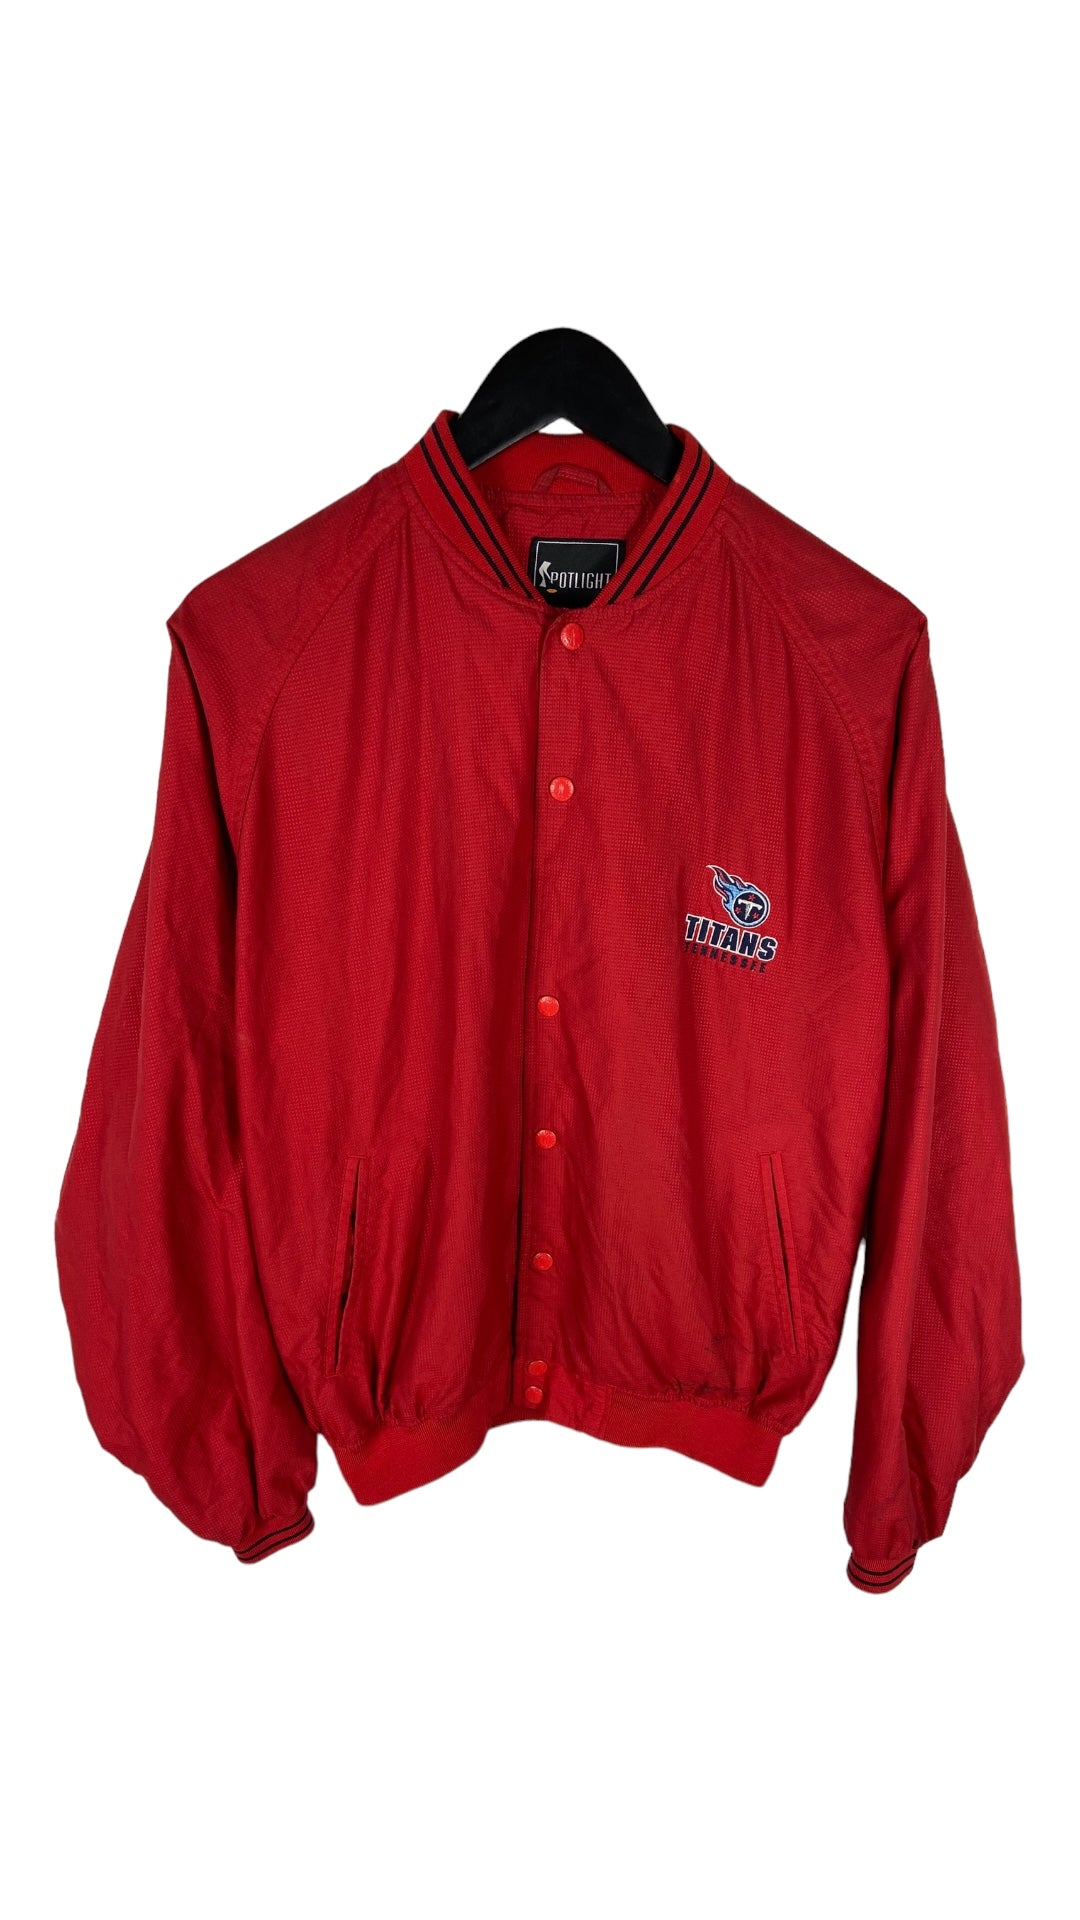 Vtg Tennessee Titans Red Jacket Sz S